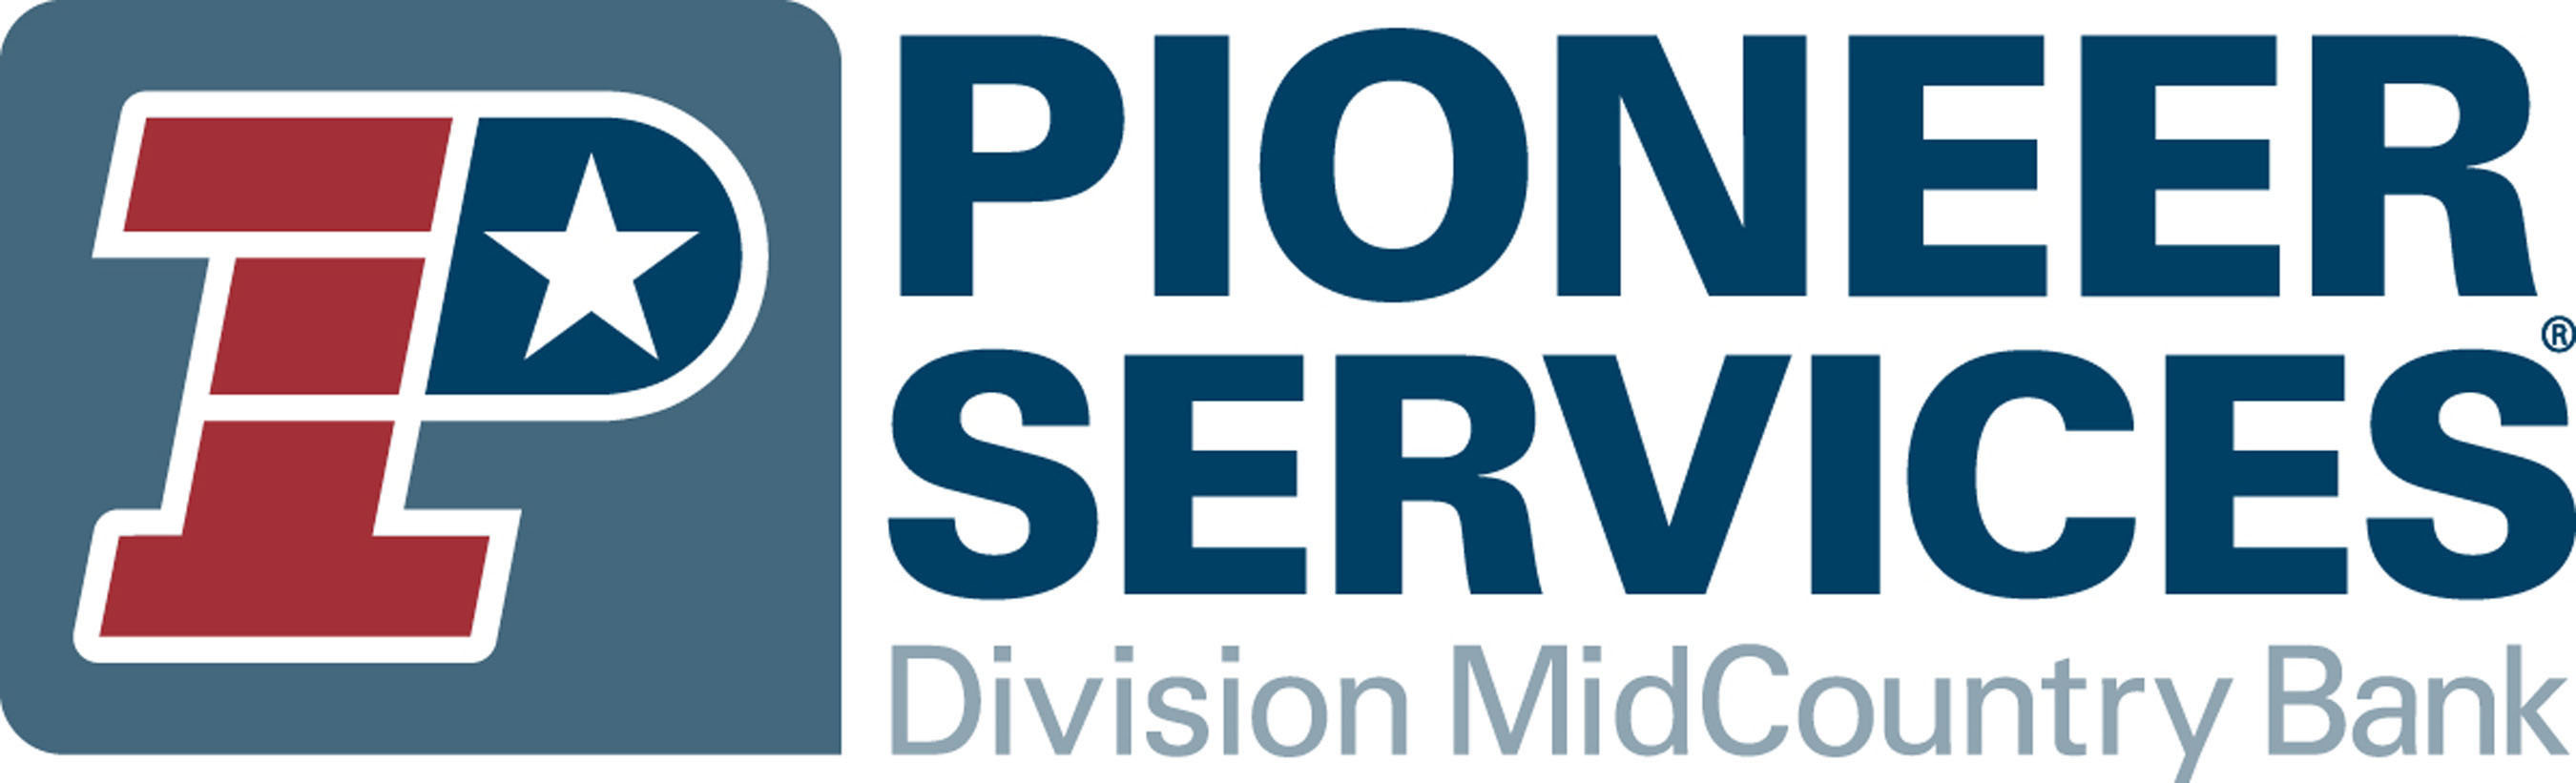 Pioneer Services, a Division of MidCountry Bank.